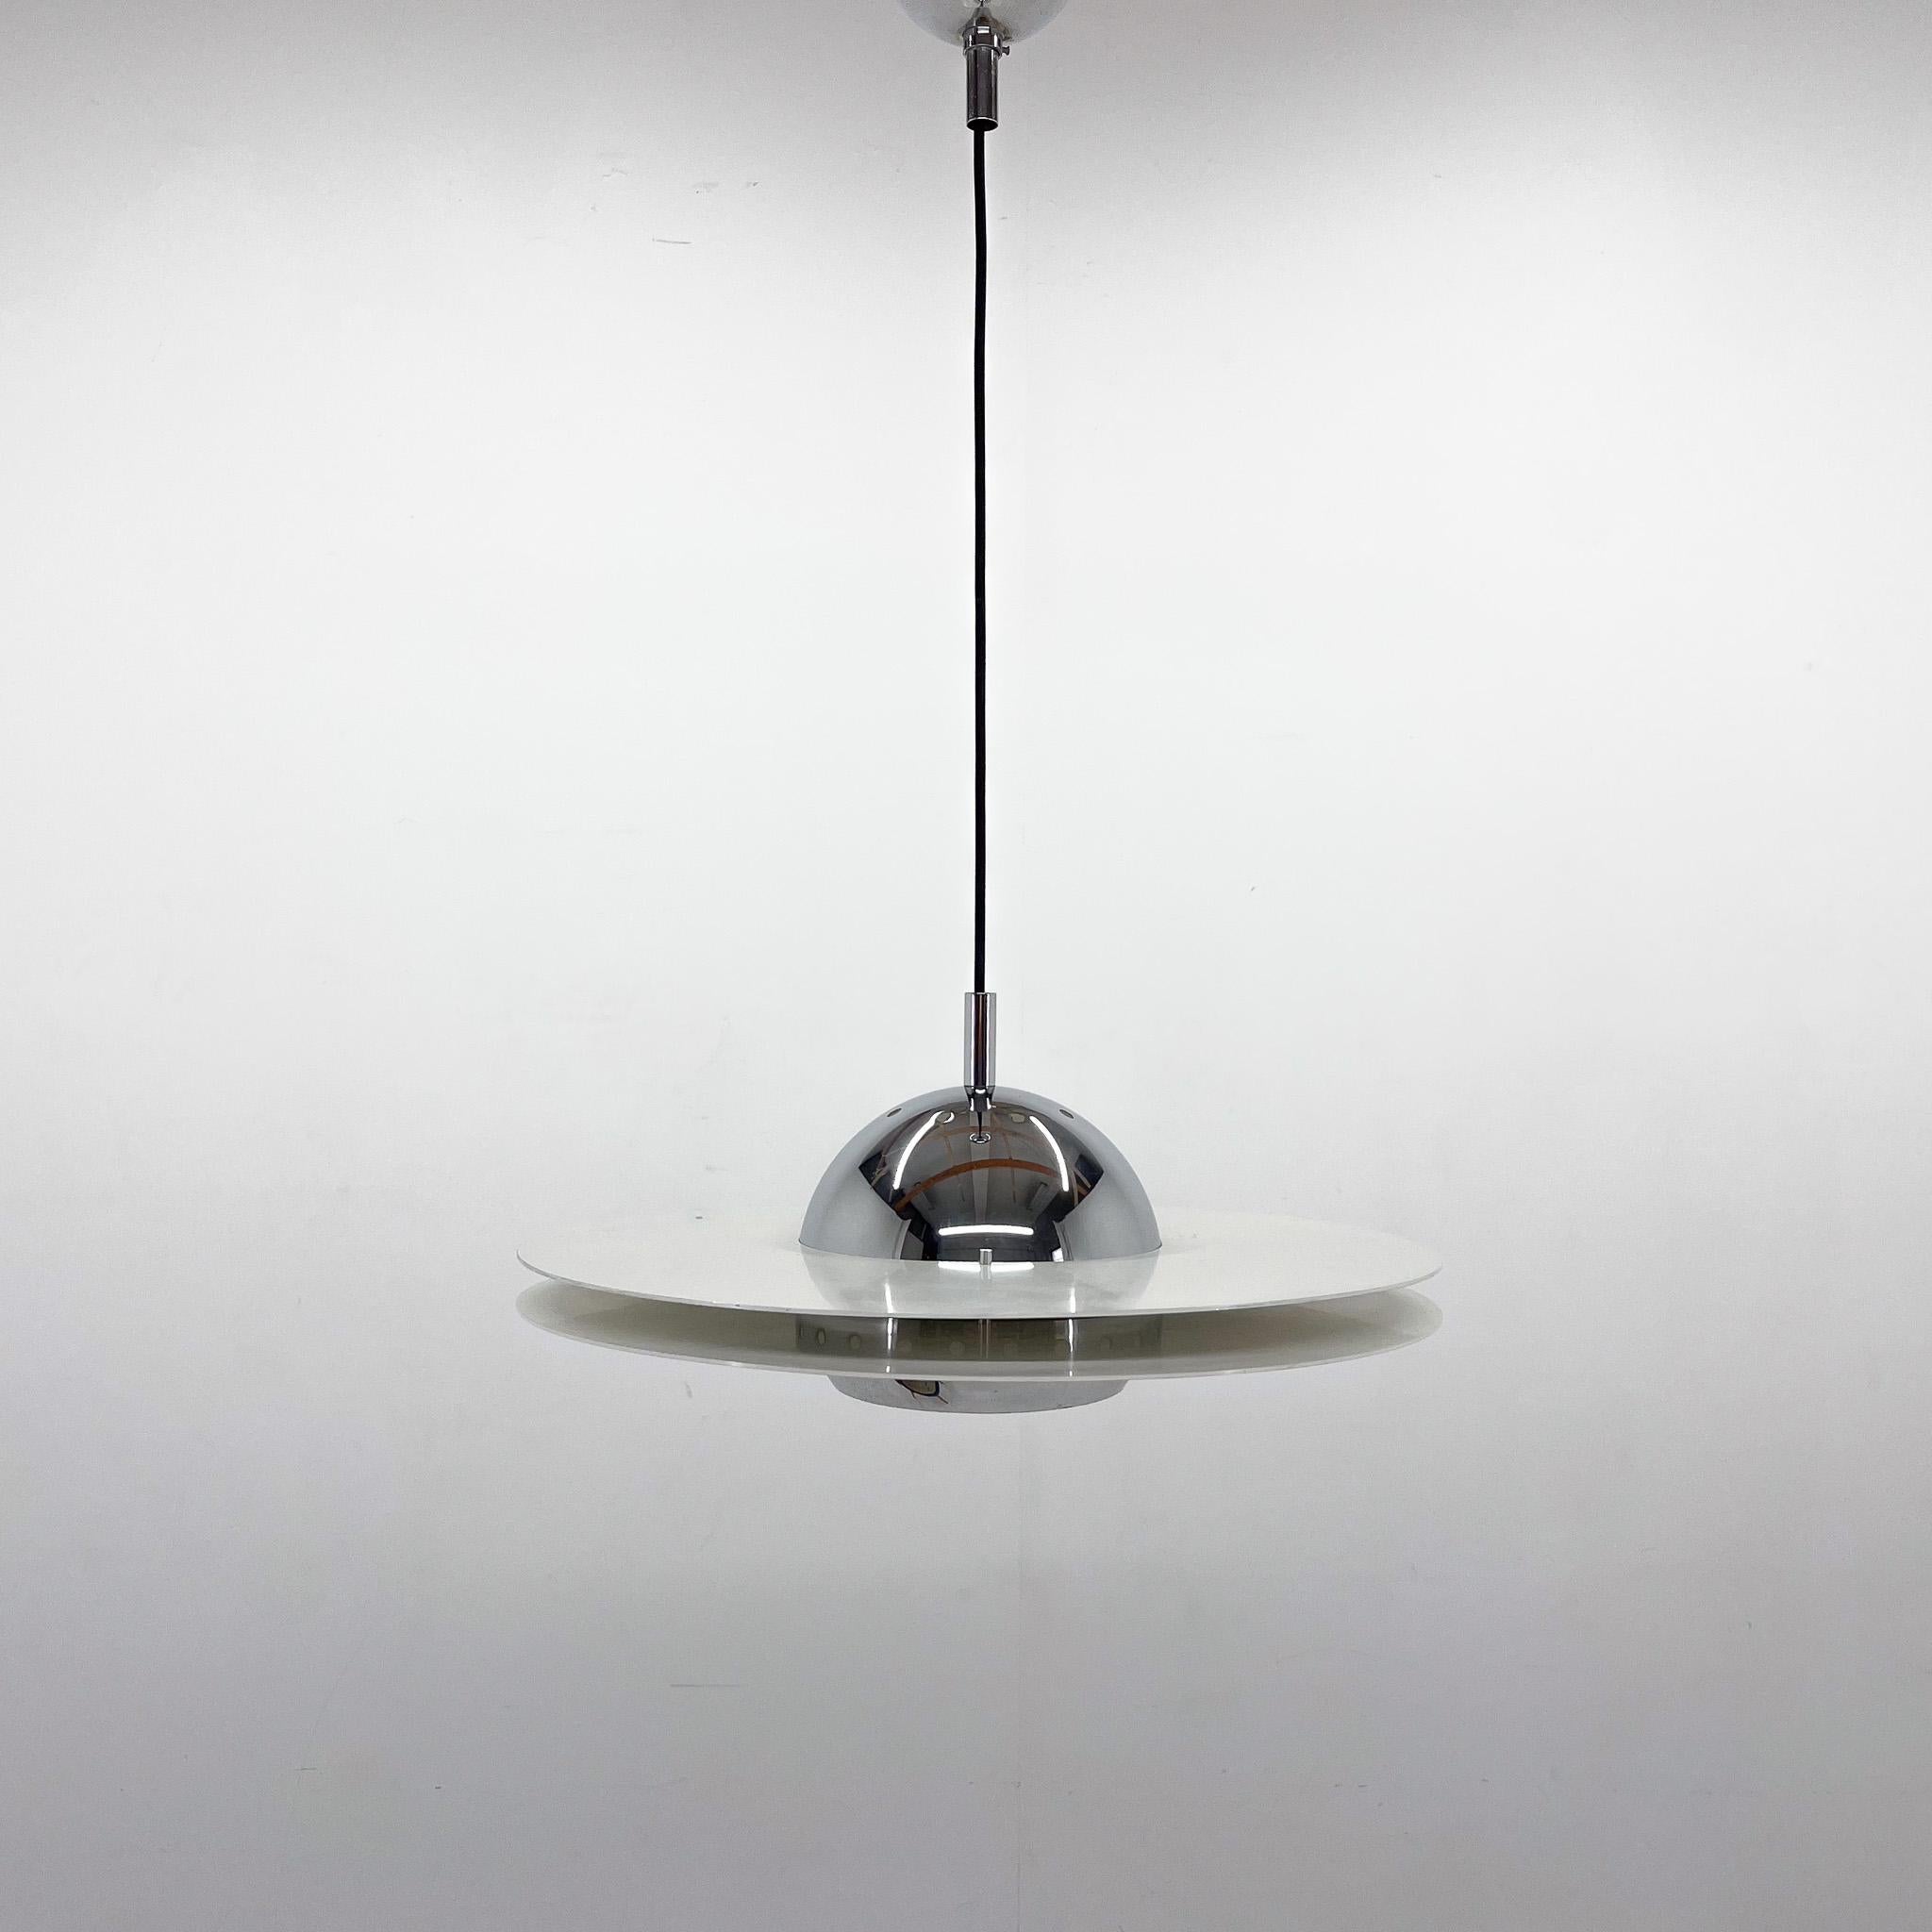 Beautiful midcentury pendant lamp made of chrome and lacquered metal. Made in Italy in the 1970s. New wiring.